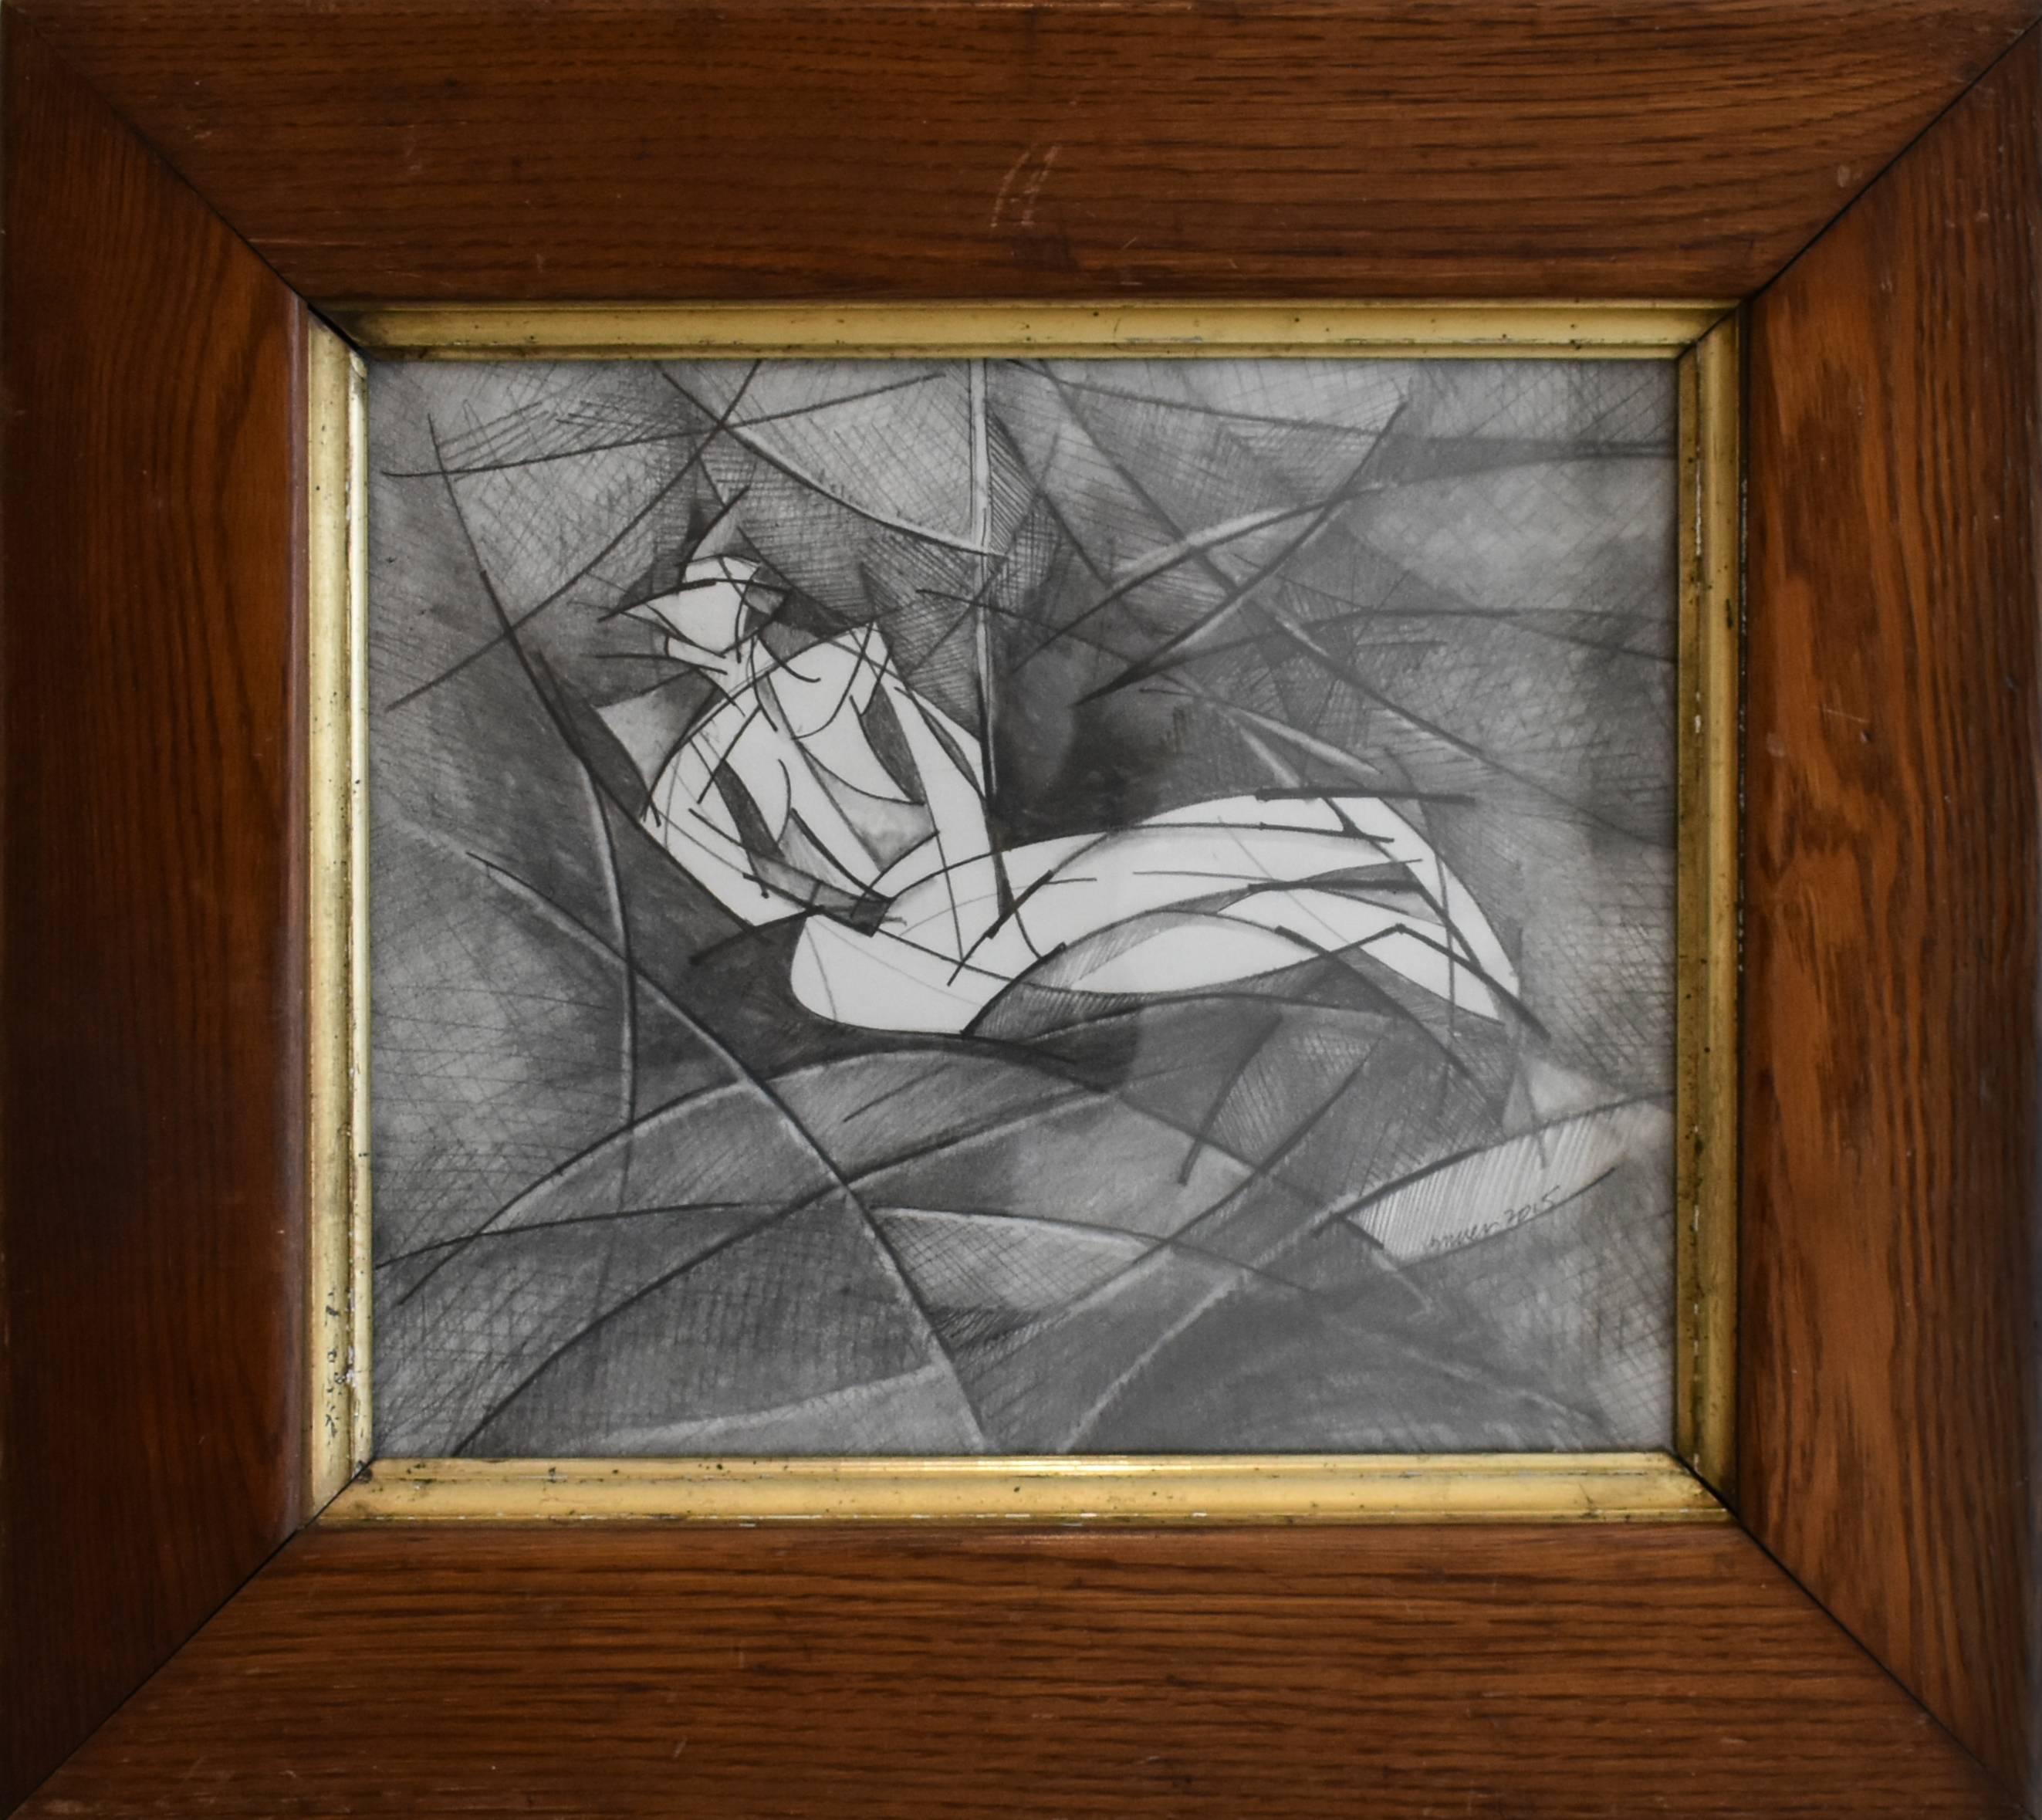 David Dew Bruner Figurative Art - Olympia XI (Abstract Cubist Style, Modern Graphite Drawing with Vintage Frame)